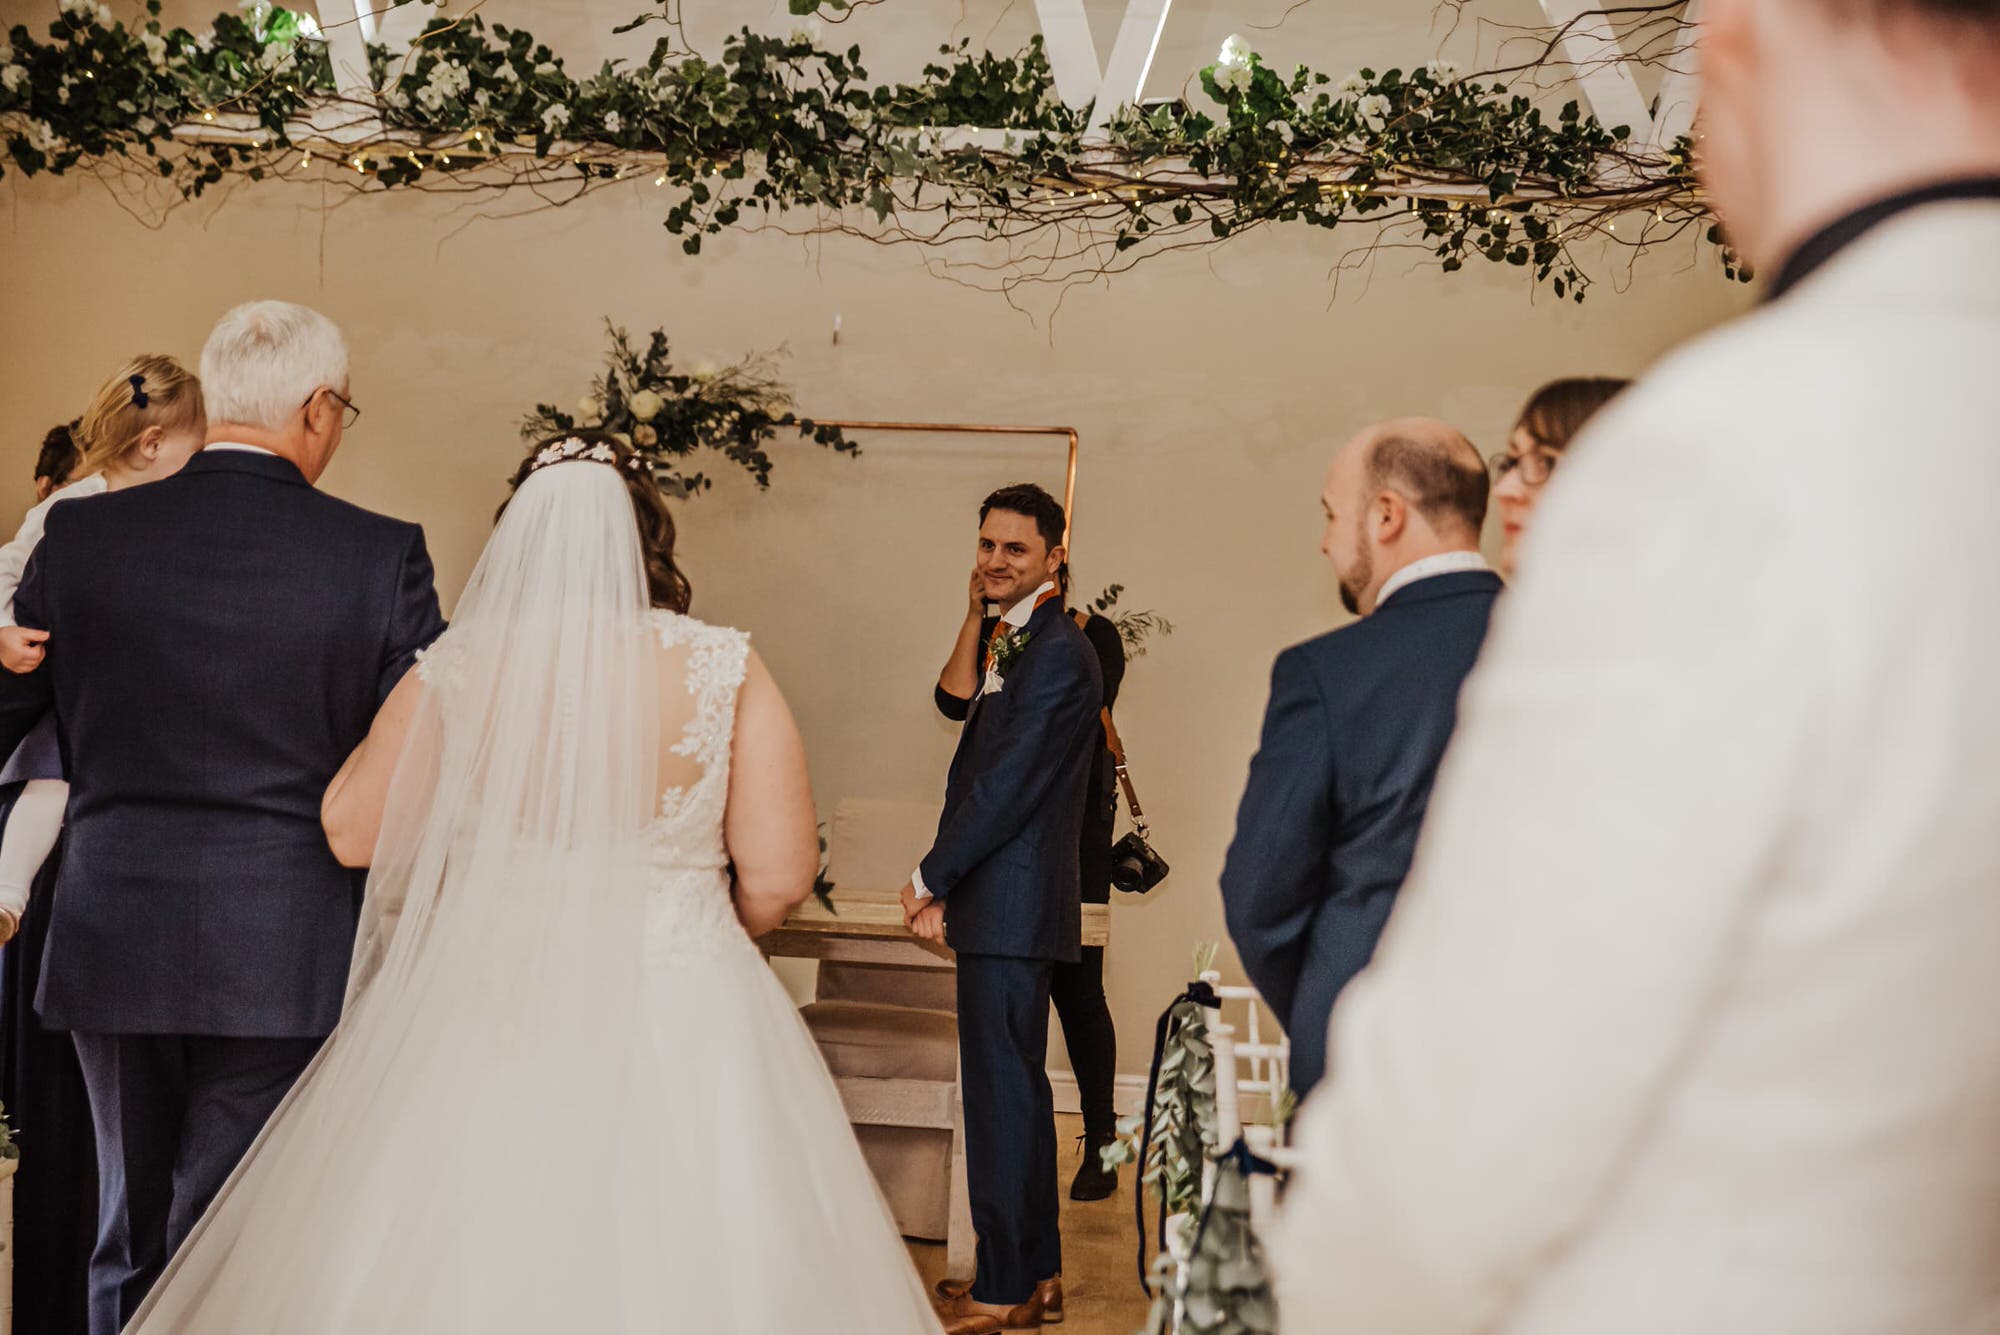 Wedding ceremony, bride in white walking down to the groom Roshni photography The Milling Barn, Bluntswood Hall, Throcking wedding photographer